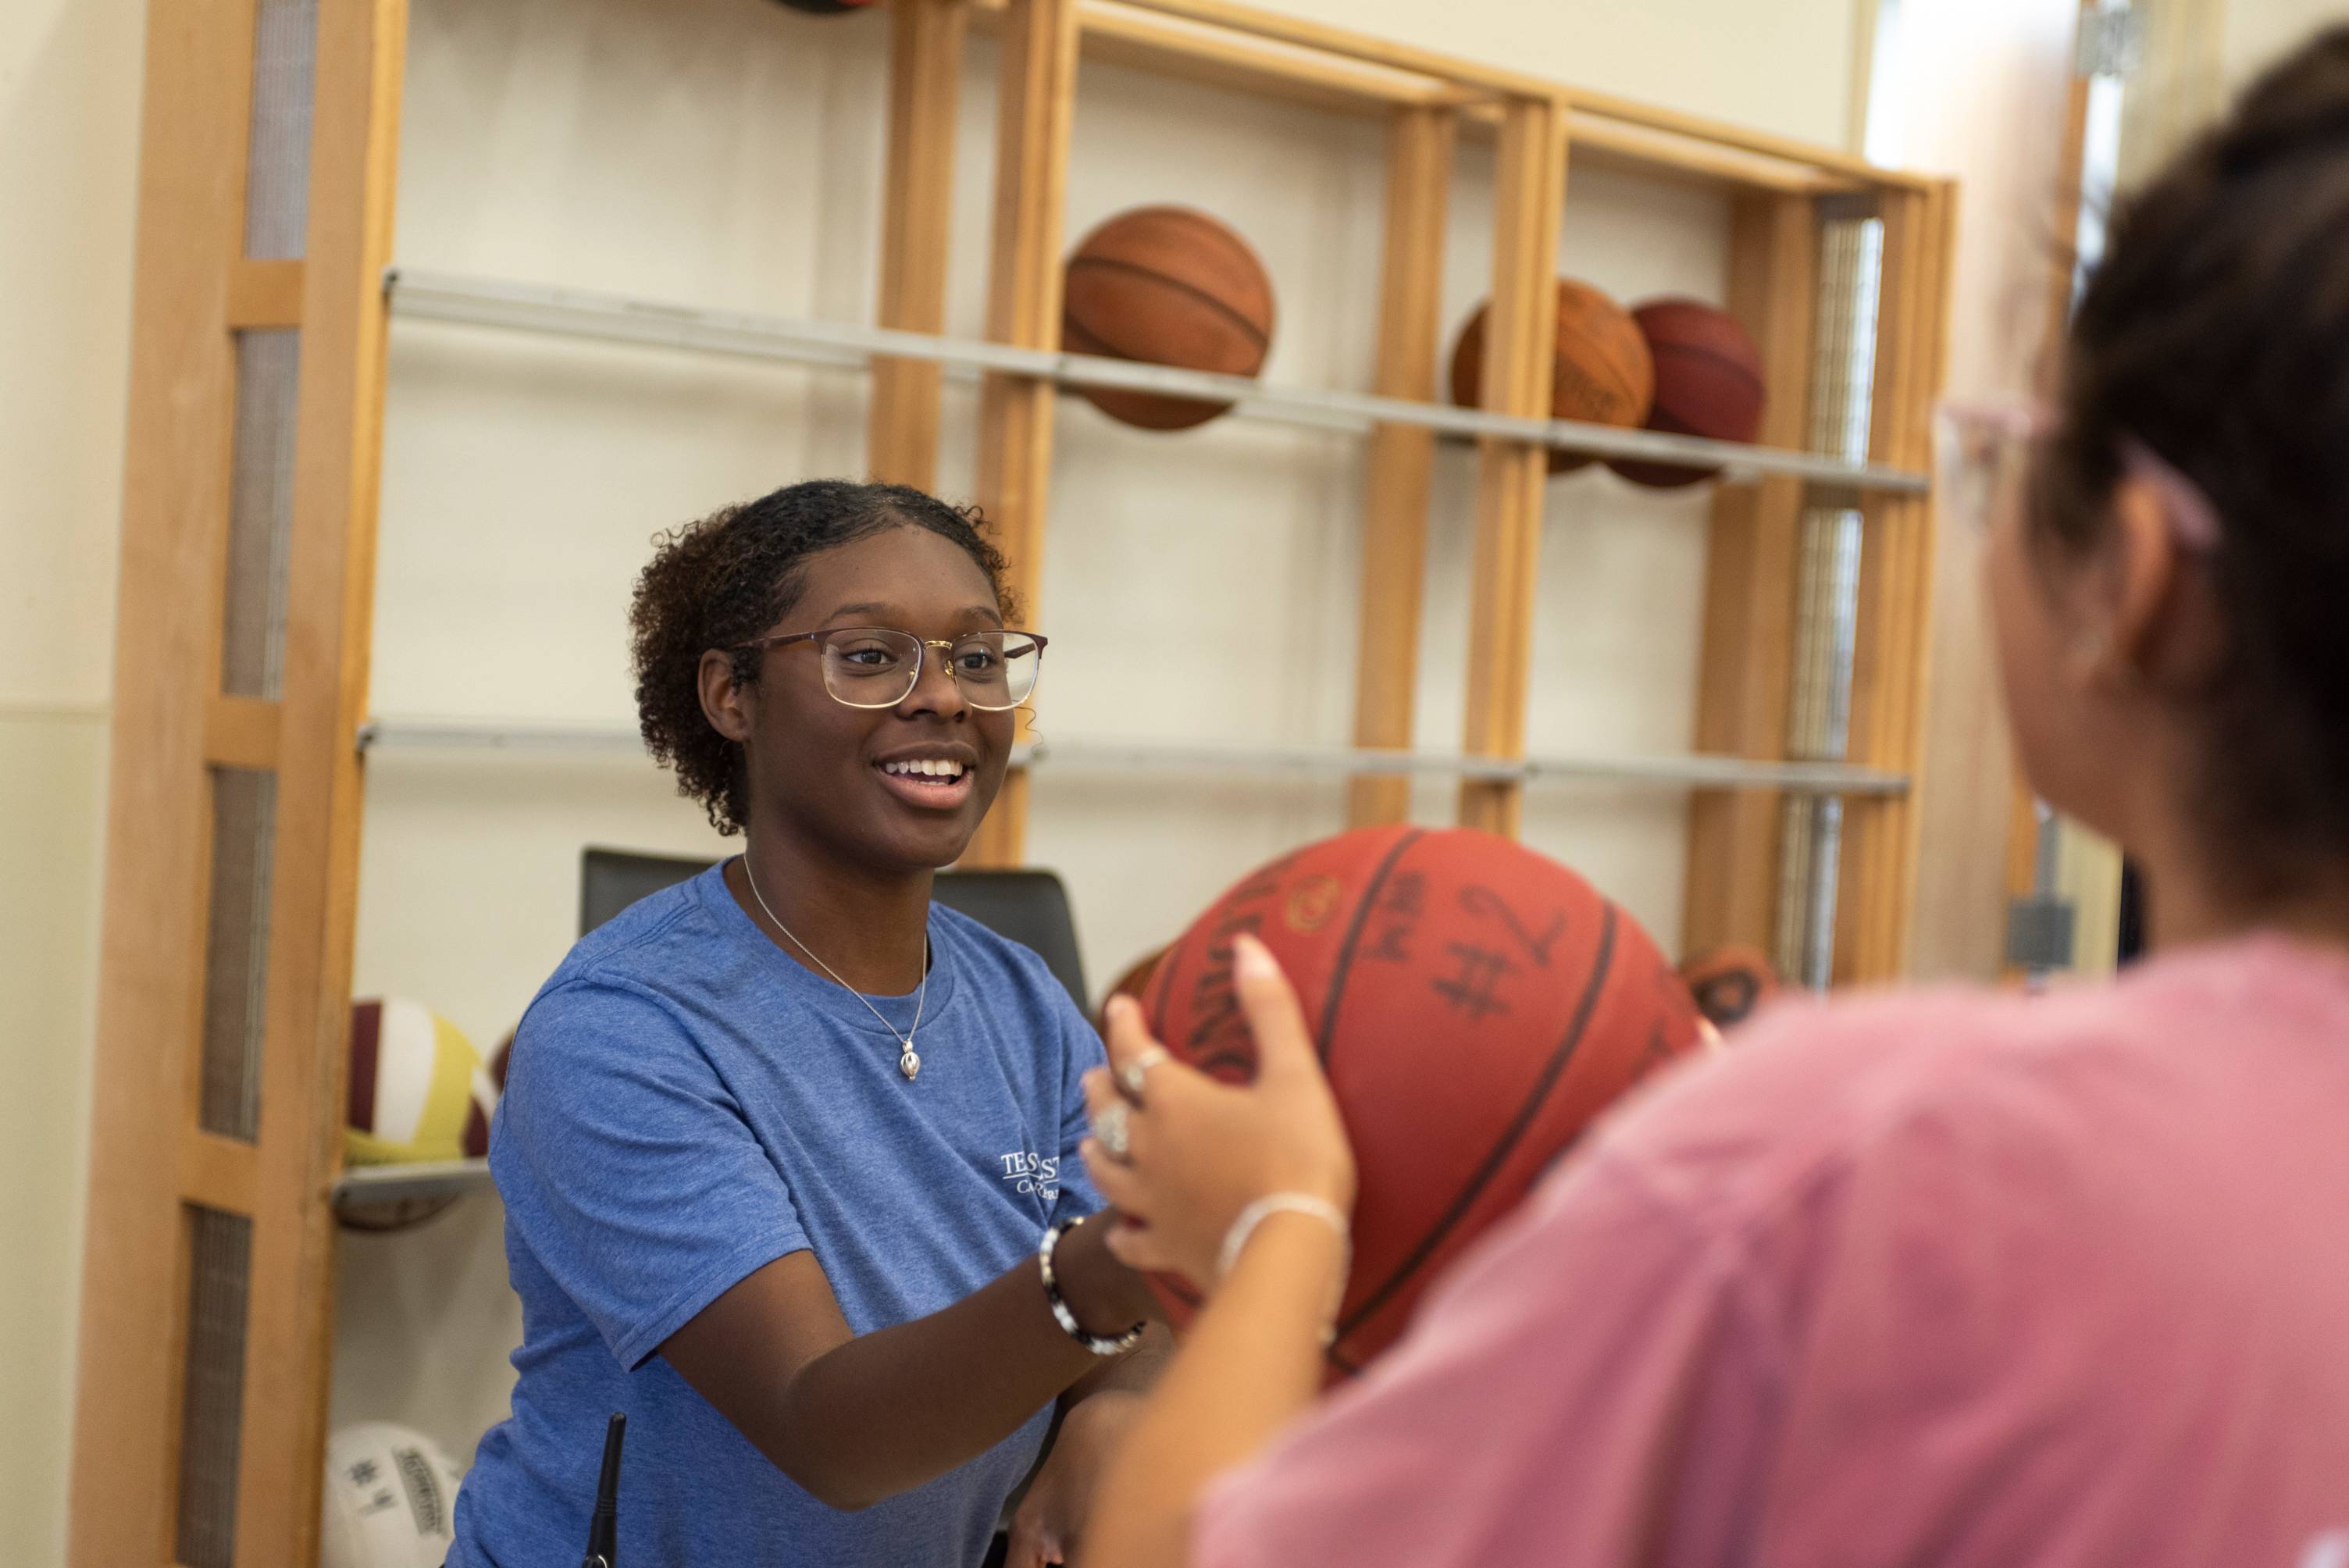 A student employee renting out a basketball